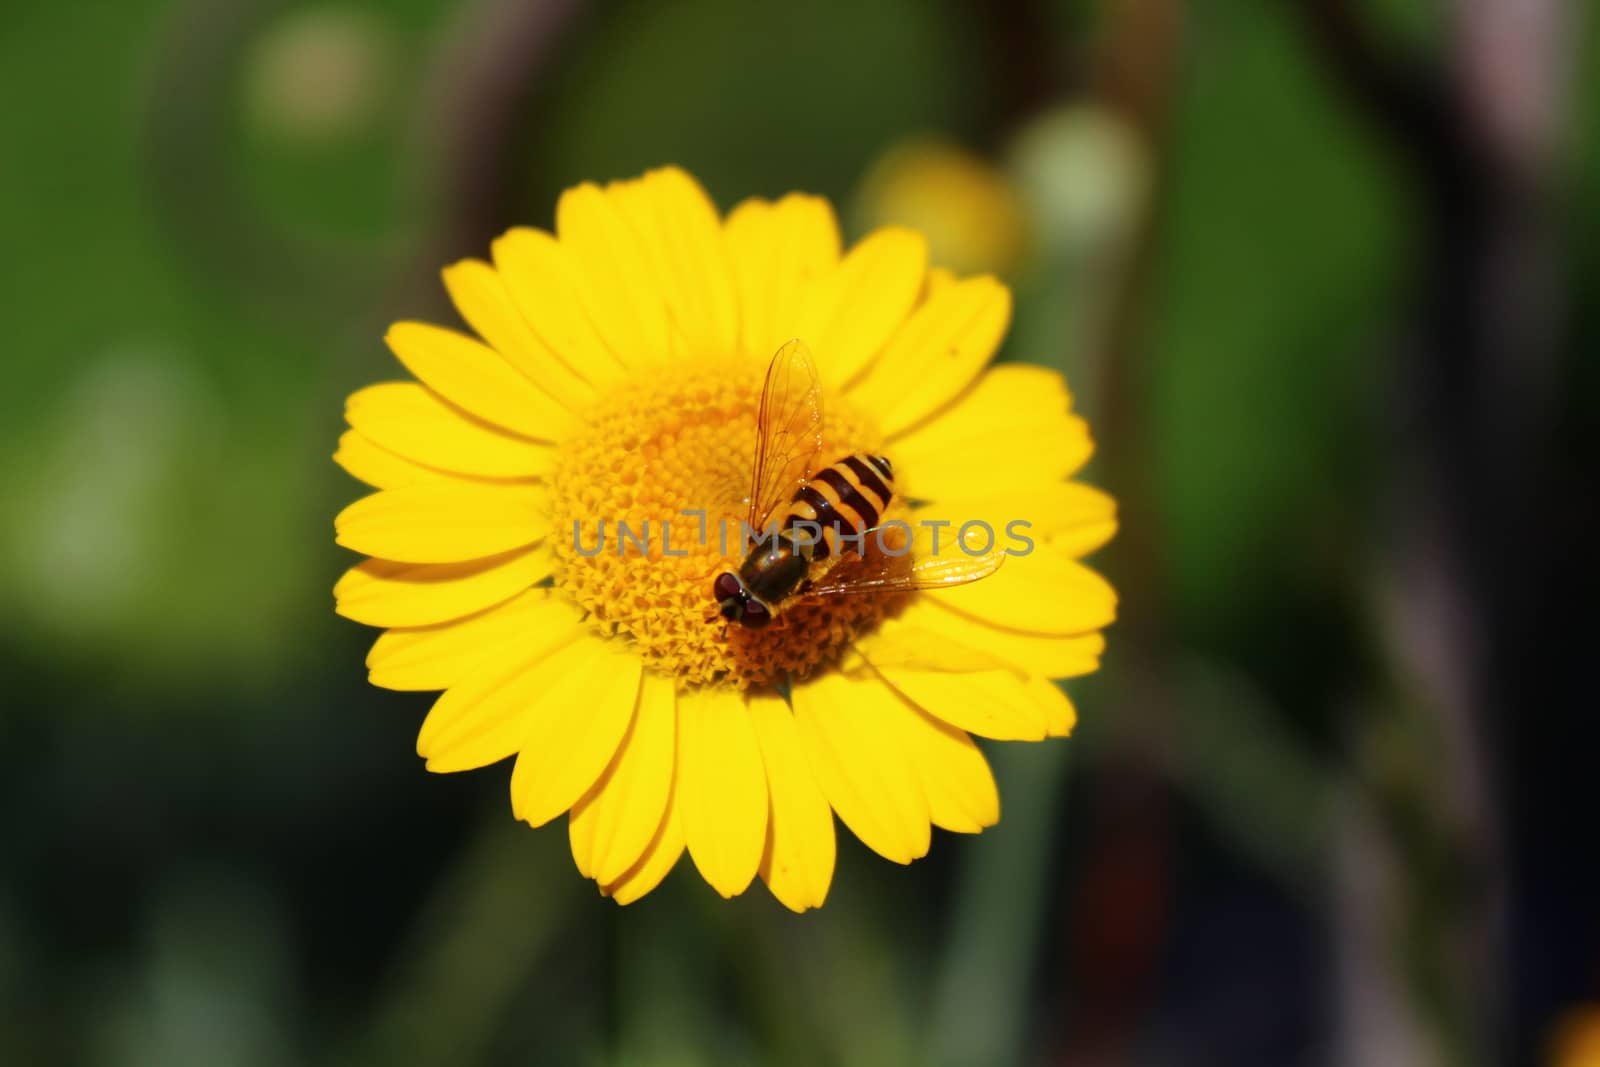 little hoverfly on a yellow flower by martina_unbehauen